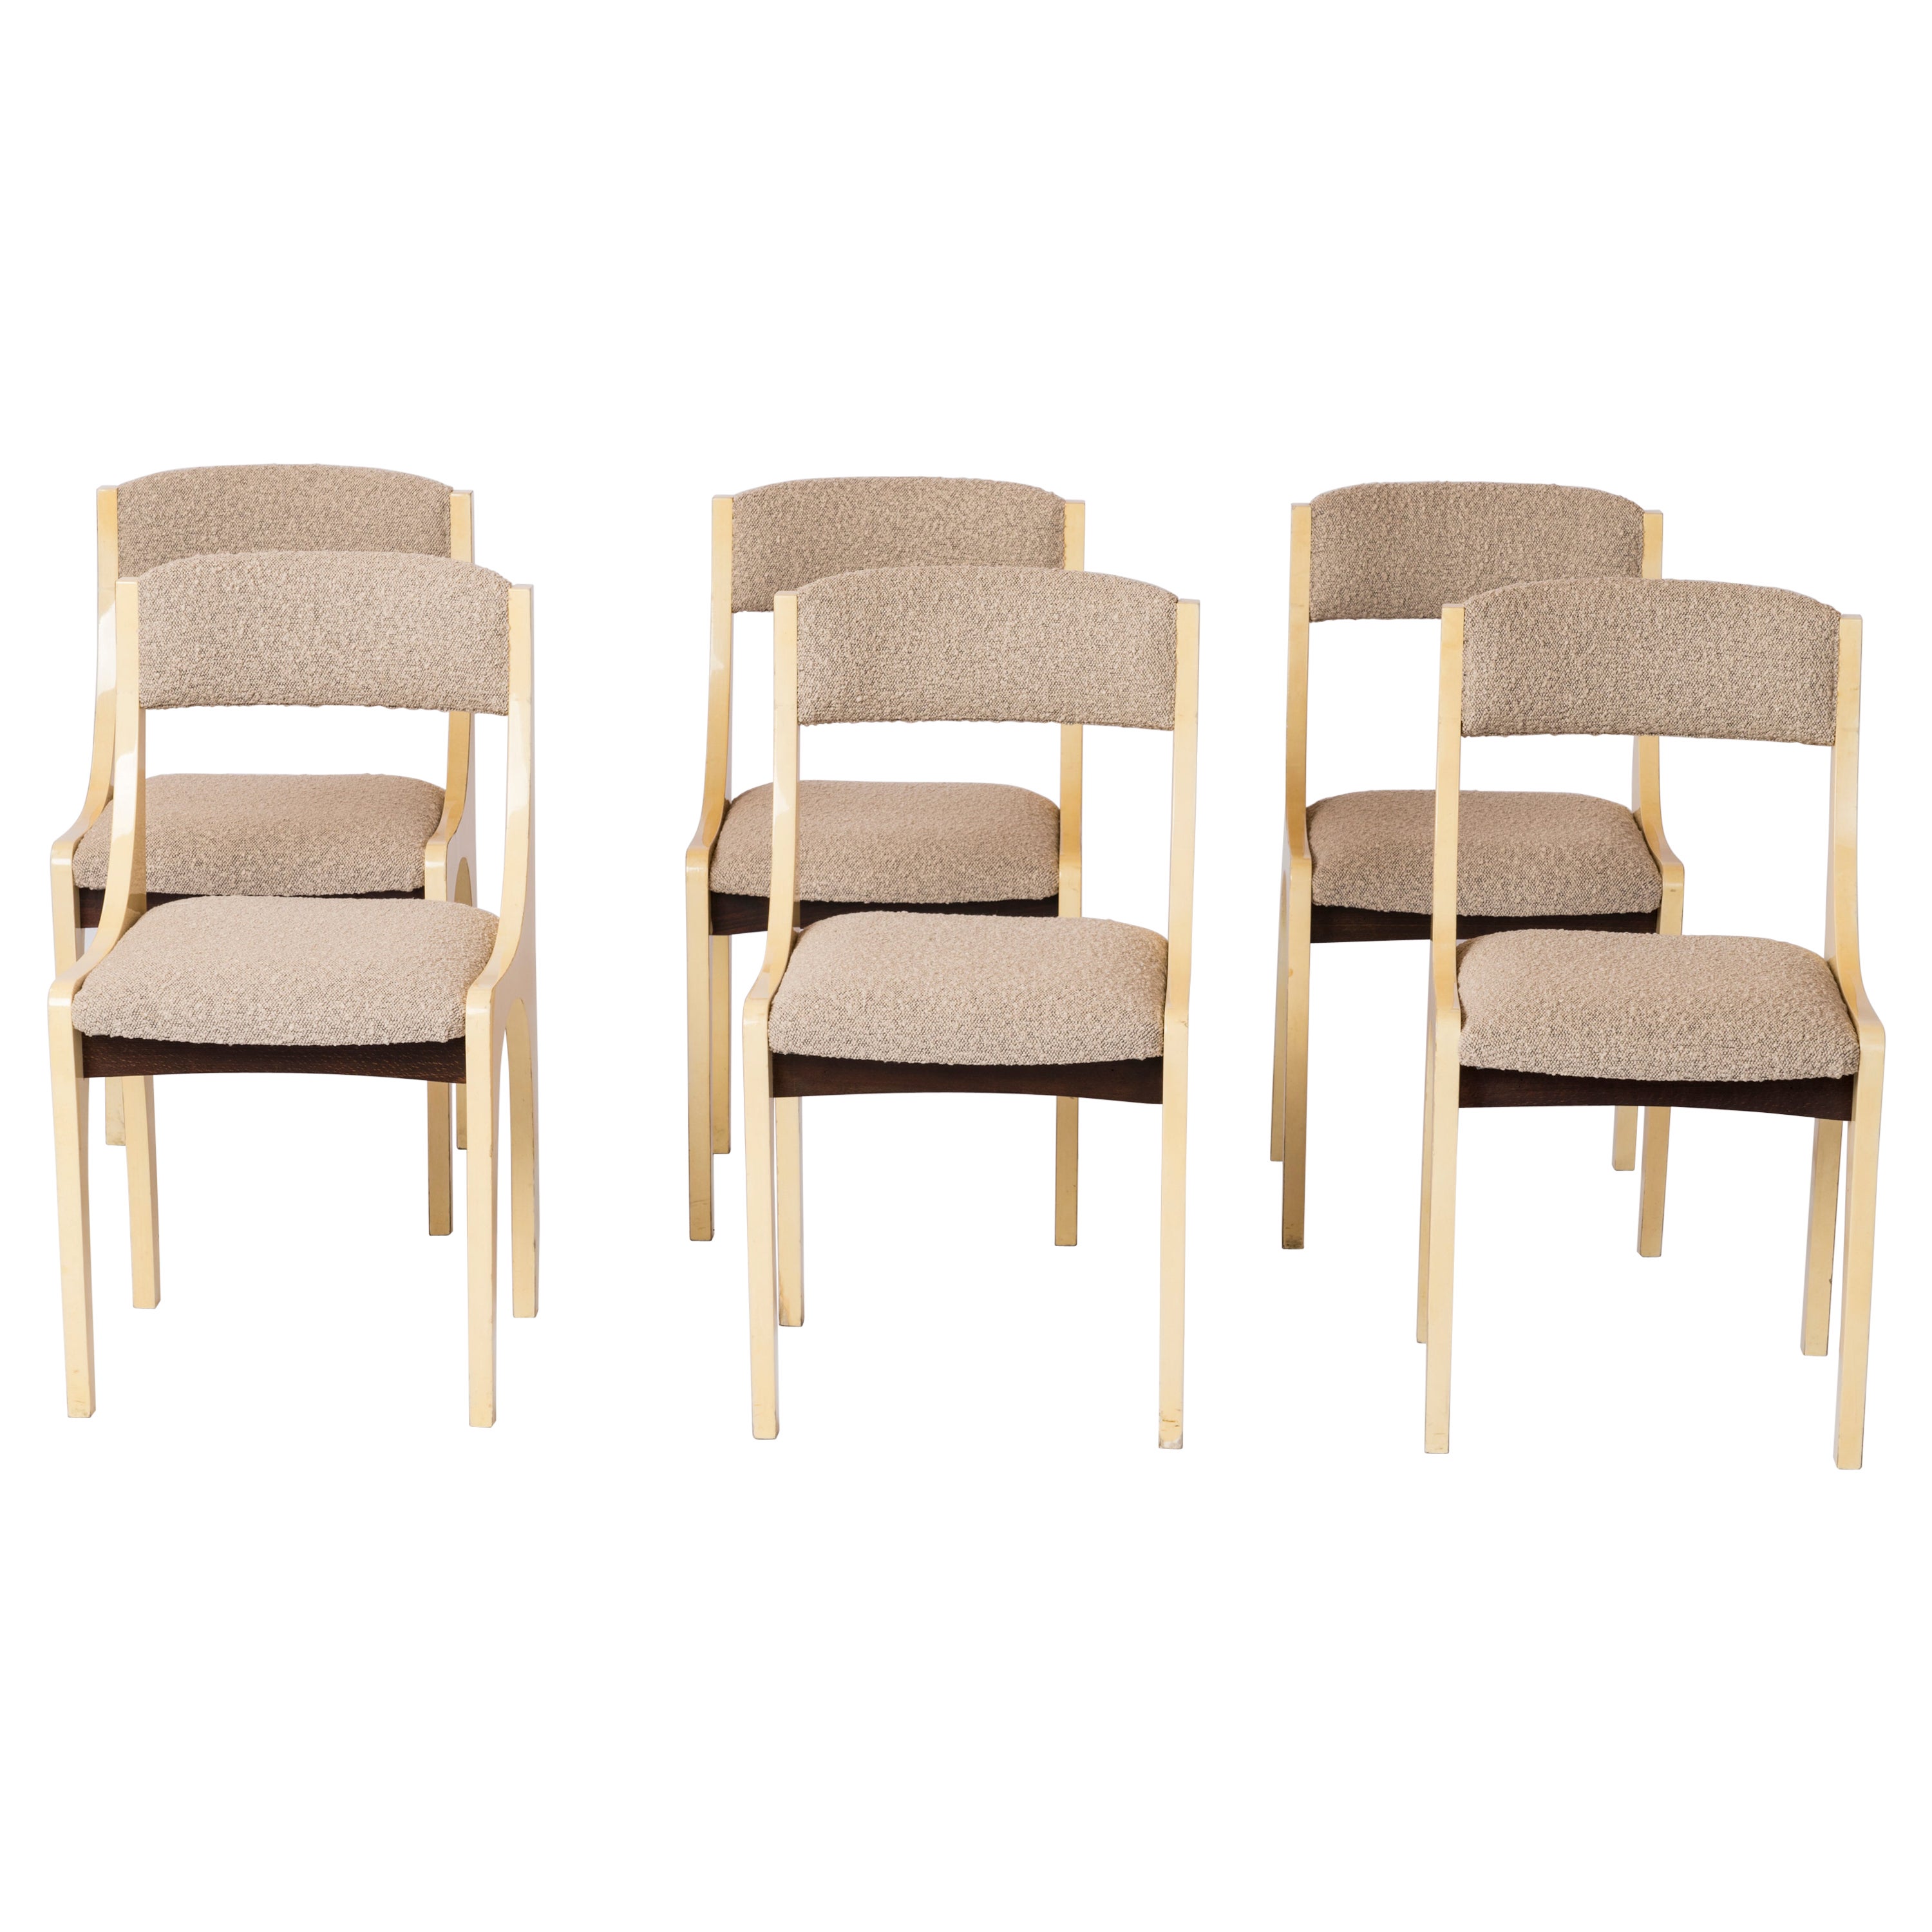 Six Cream Velum & Chiné Upholstery Chairs by Aldo Tura - Italy 1970's For Sale